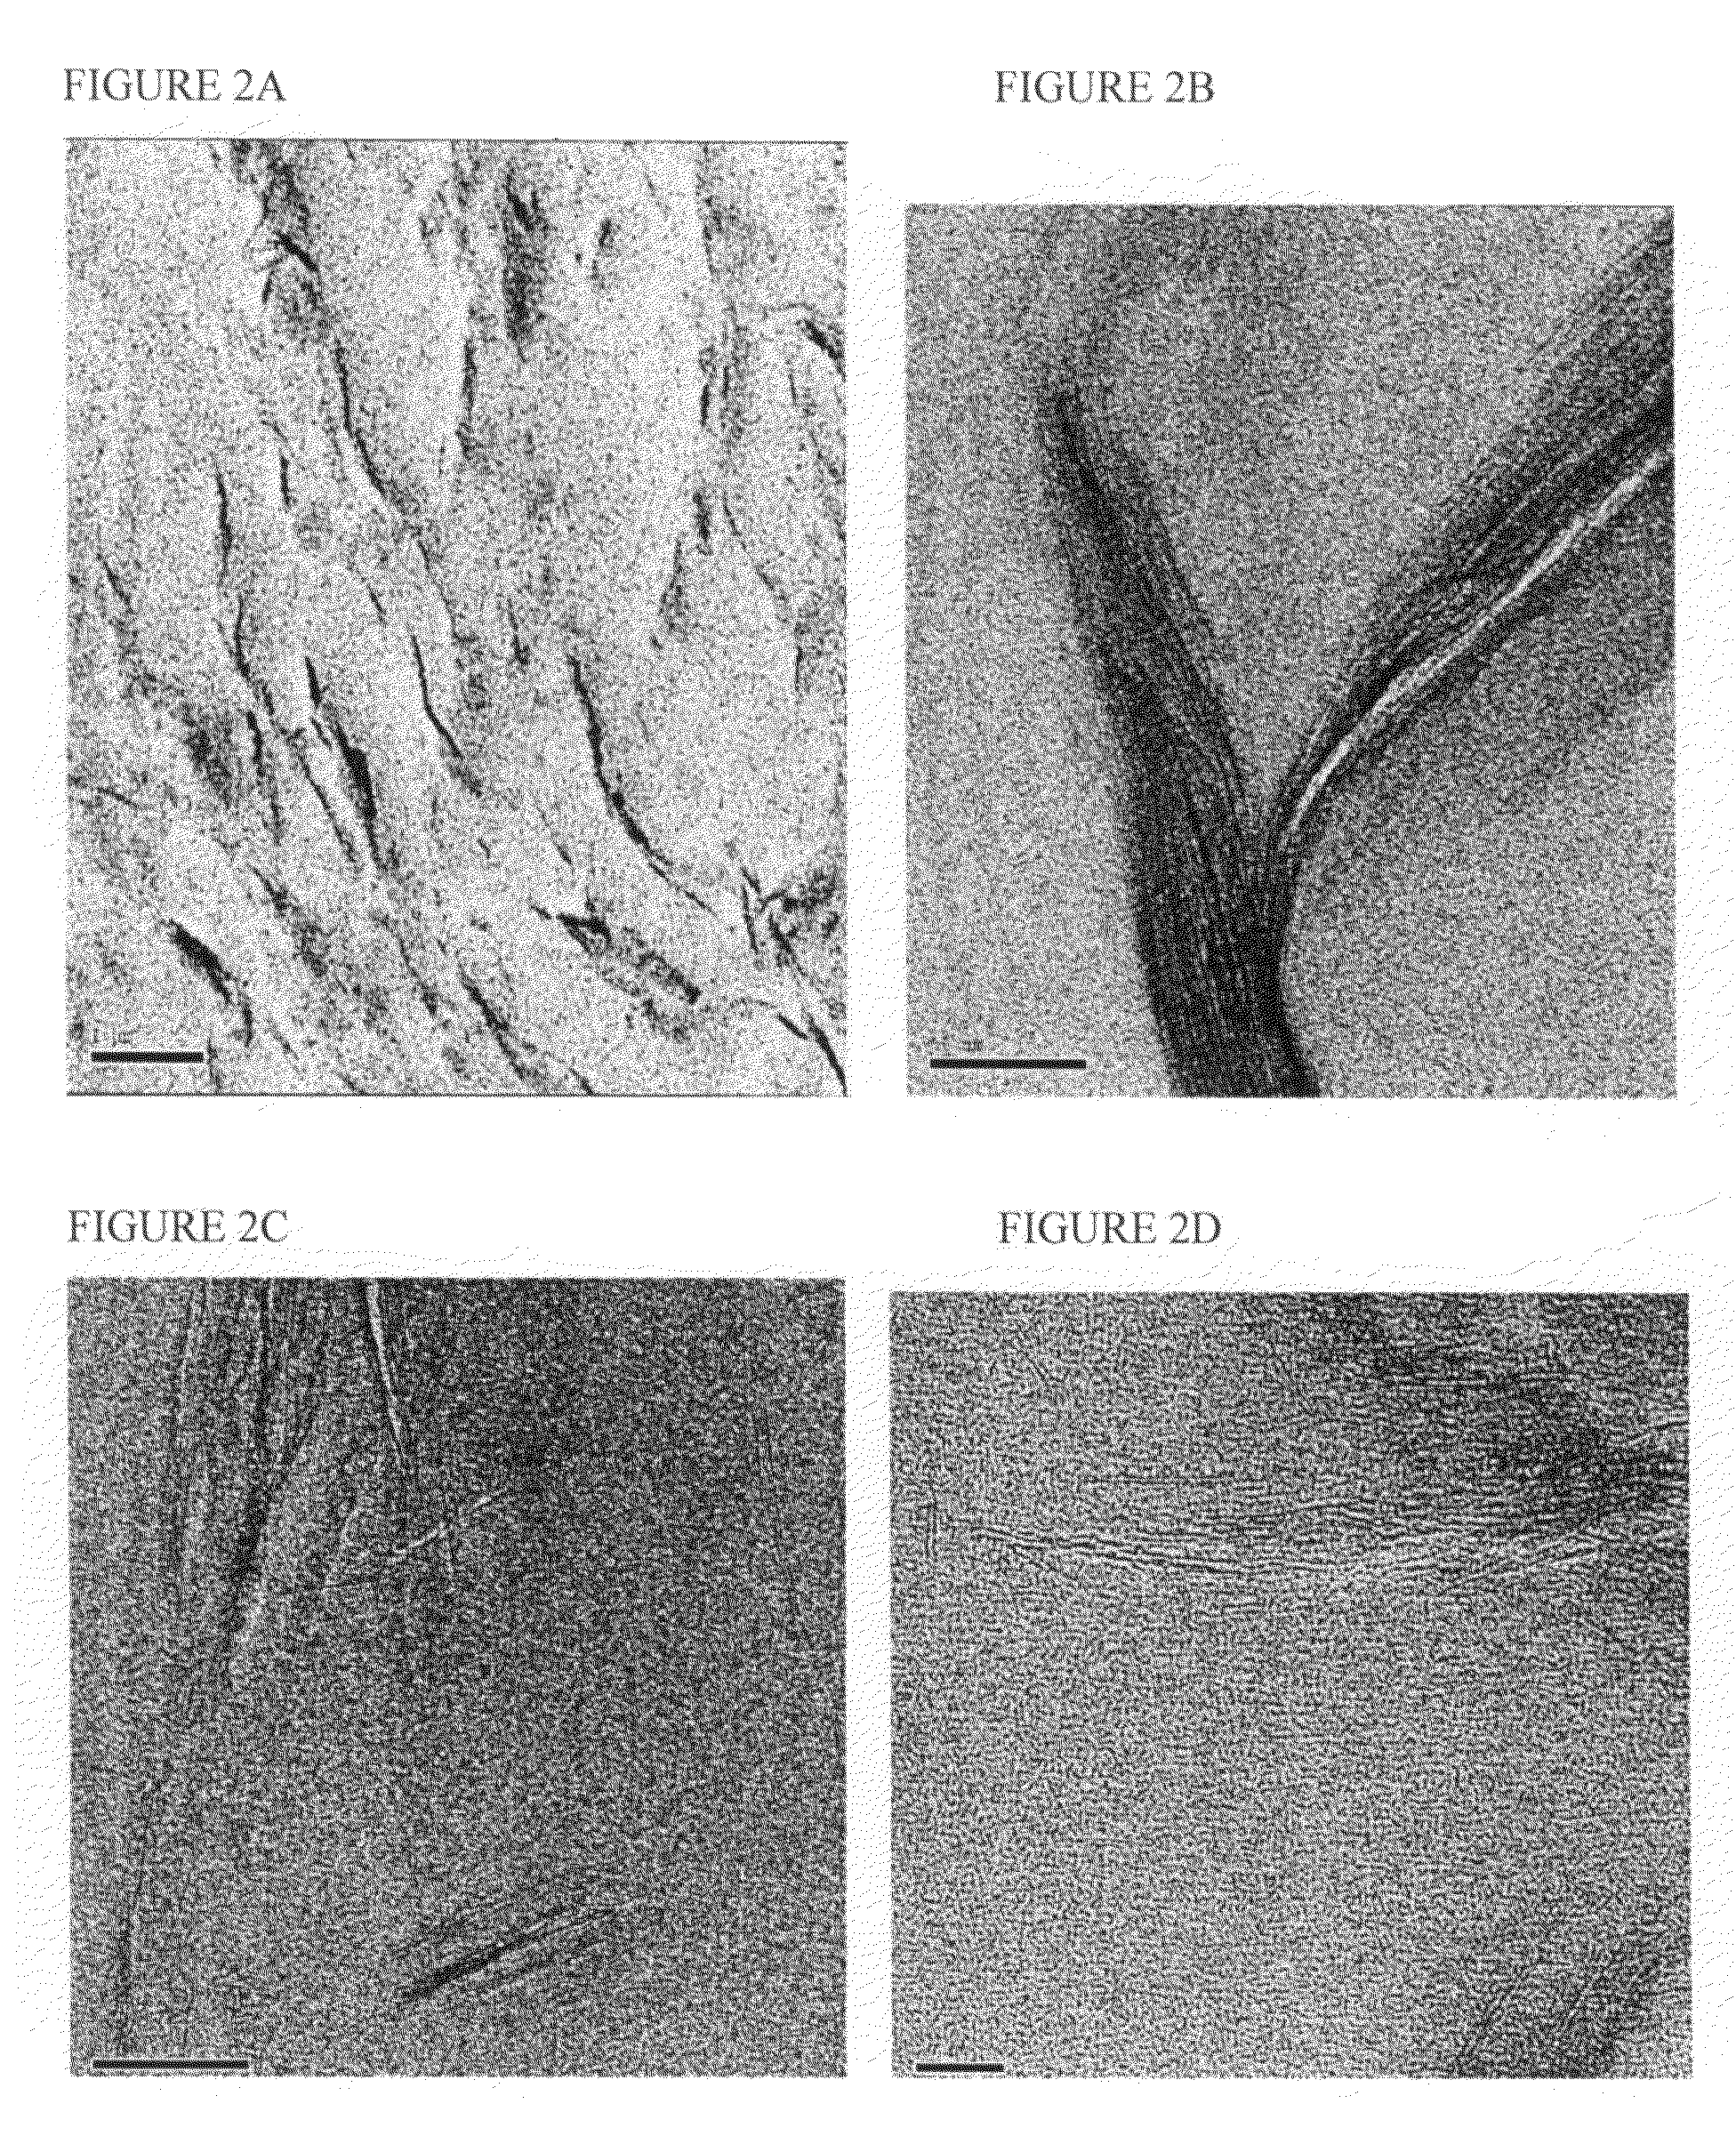 Thermoplastic elastomer compositions, methods for making the same, and articles made therefrom